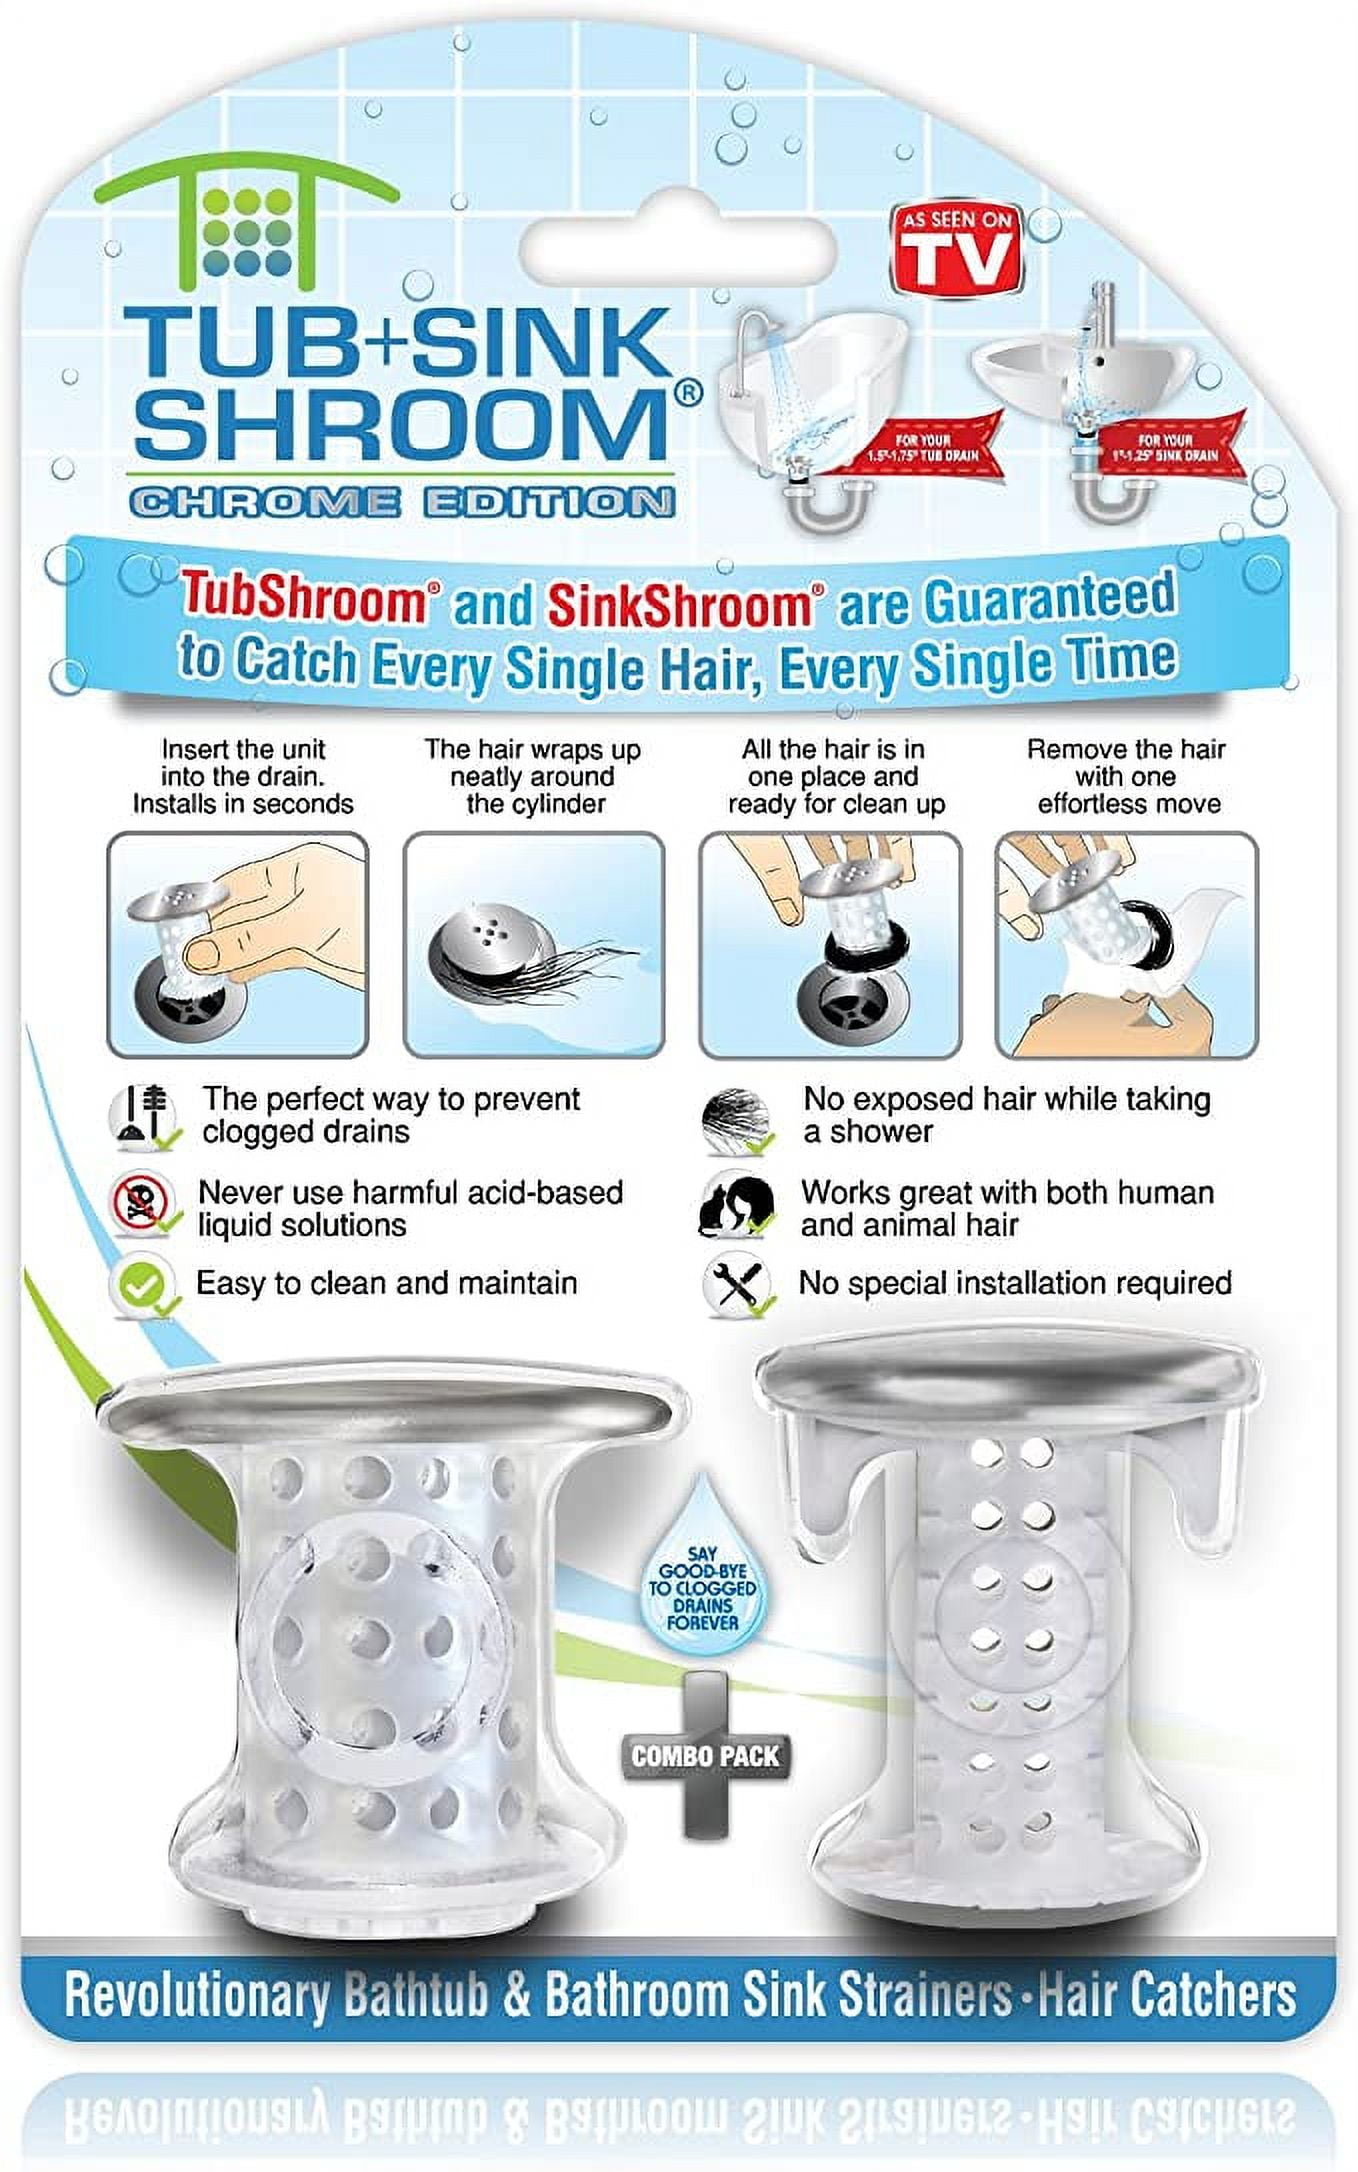 SINK SHROOM ULTRA EDITION DRAIN PROTECTOR, Product Review 